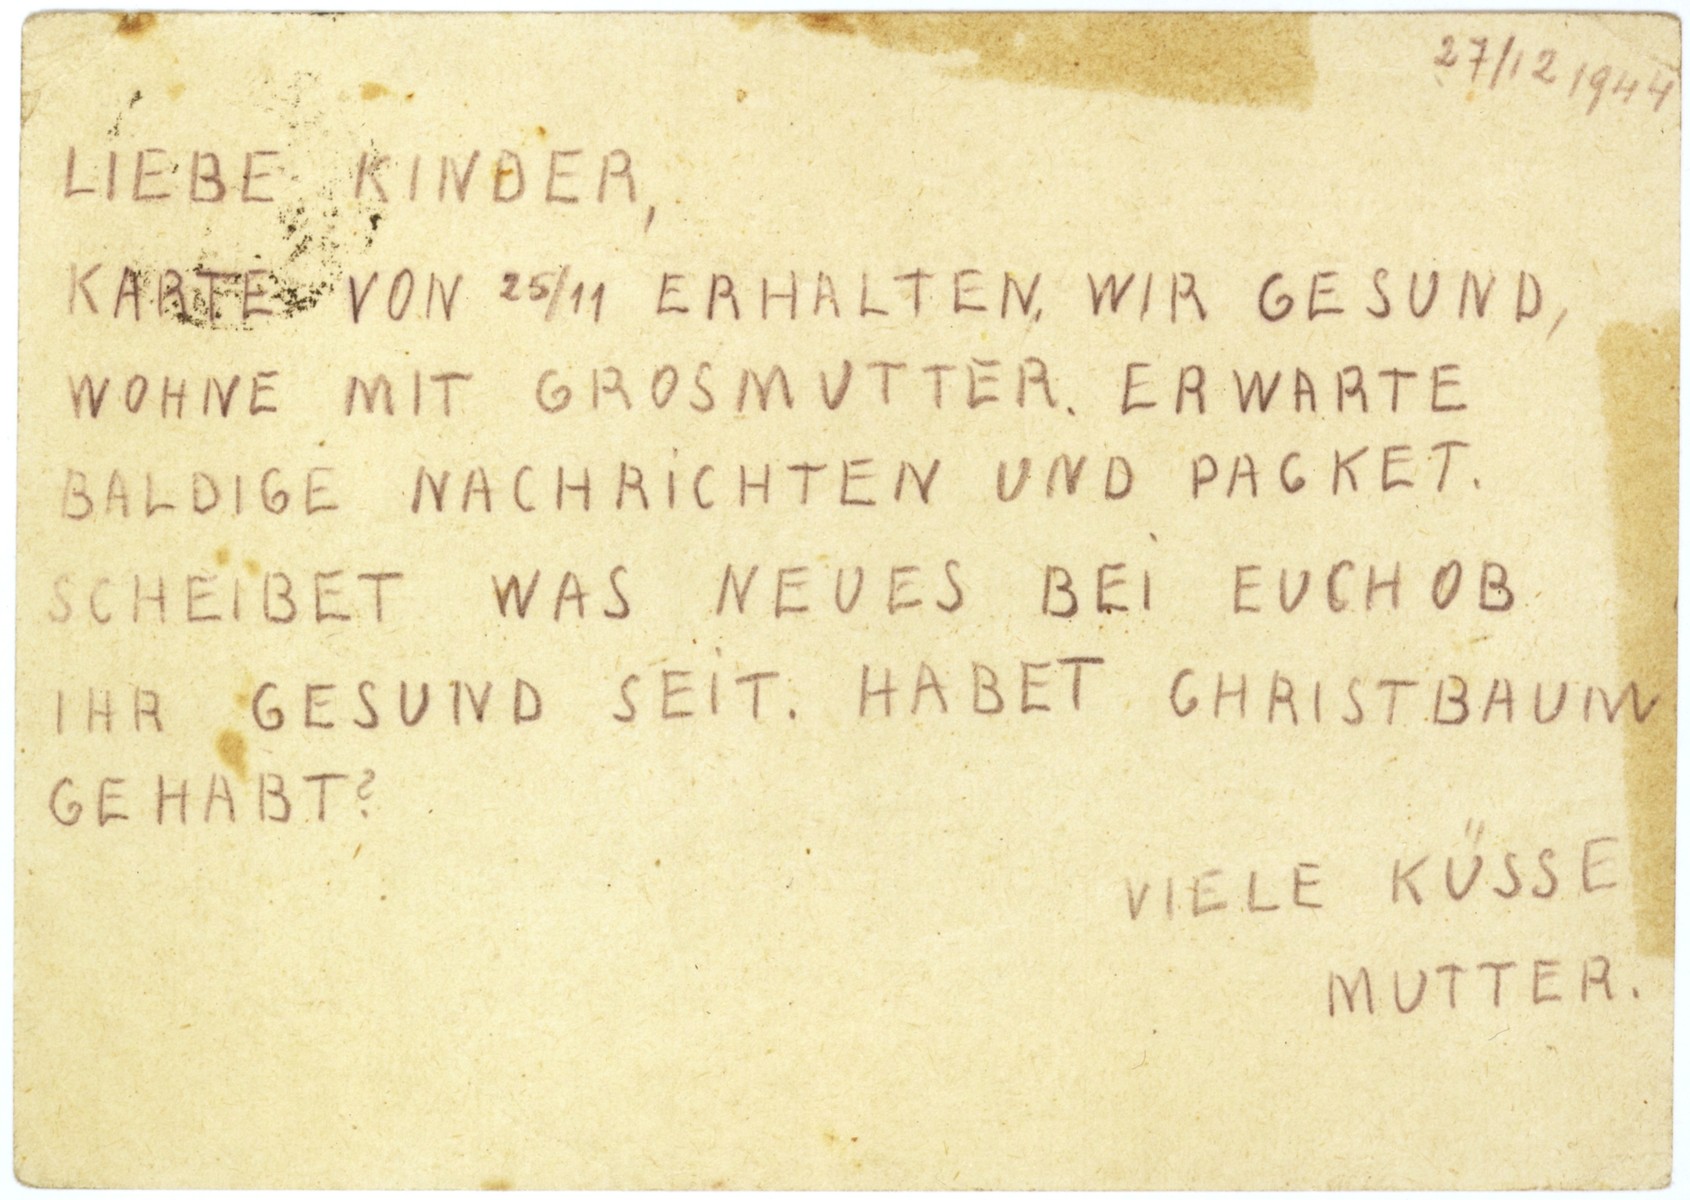 A postcard sent to Marcel and Jan Hajsky by their mother, Anna (Goldstein) Hajsky, from the Theresienstadt concentration camp.  

Anna writes that she and her mother, Fanny Goldstein, received the boys' postcard dated November 25, 1944, and that they are healthy.  The two await news from Marcel and Jan, as well as a care package.  Anna asks if her sons had a Christmas tree for the holidays.  Marcel and Jan were able to escape deportation because their father, Cenek Hajsky, was not Jewish.